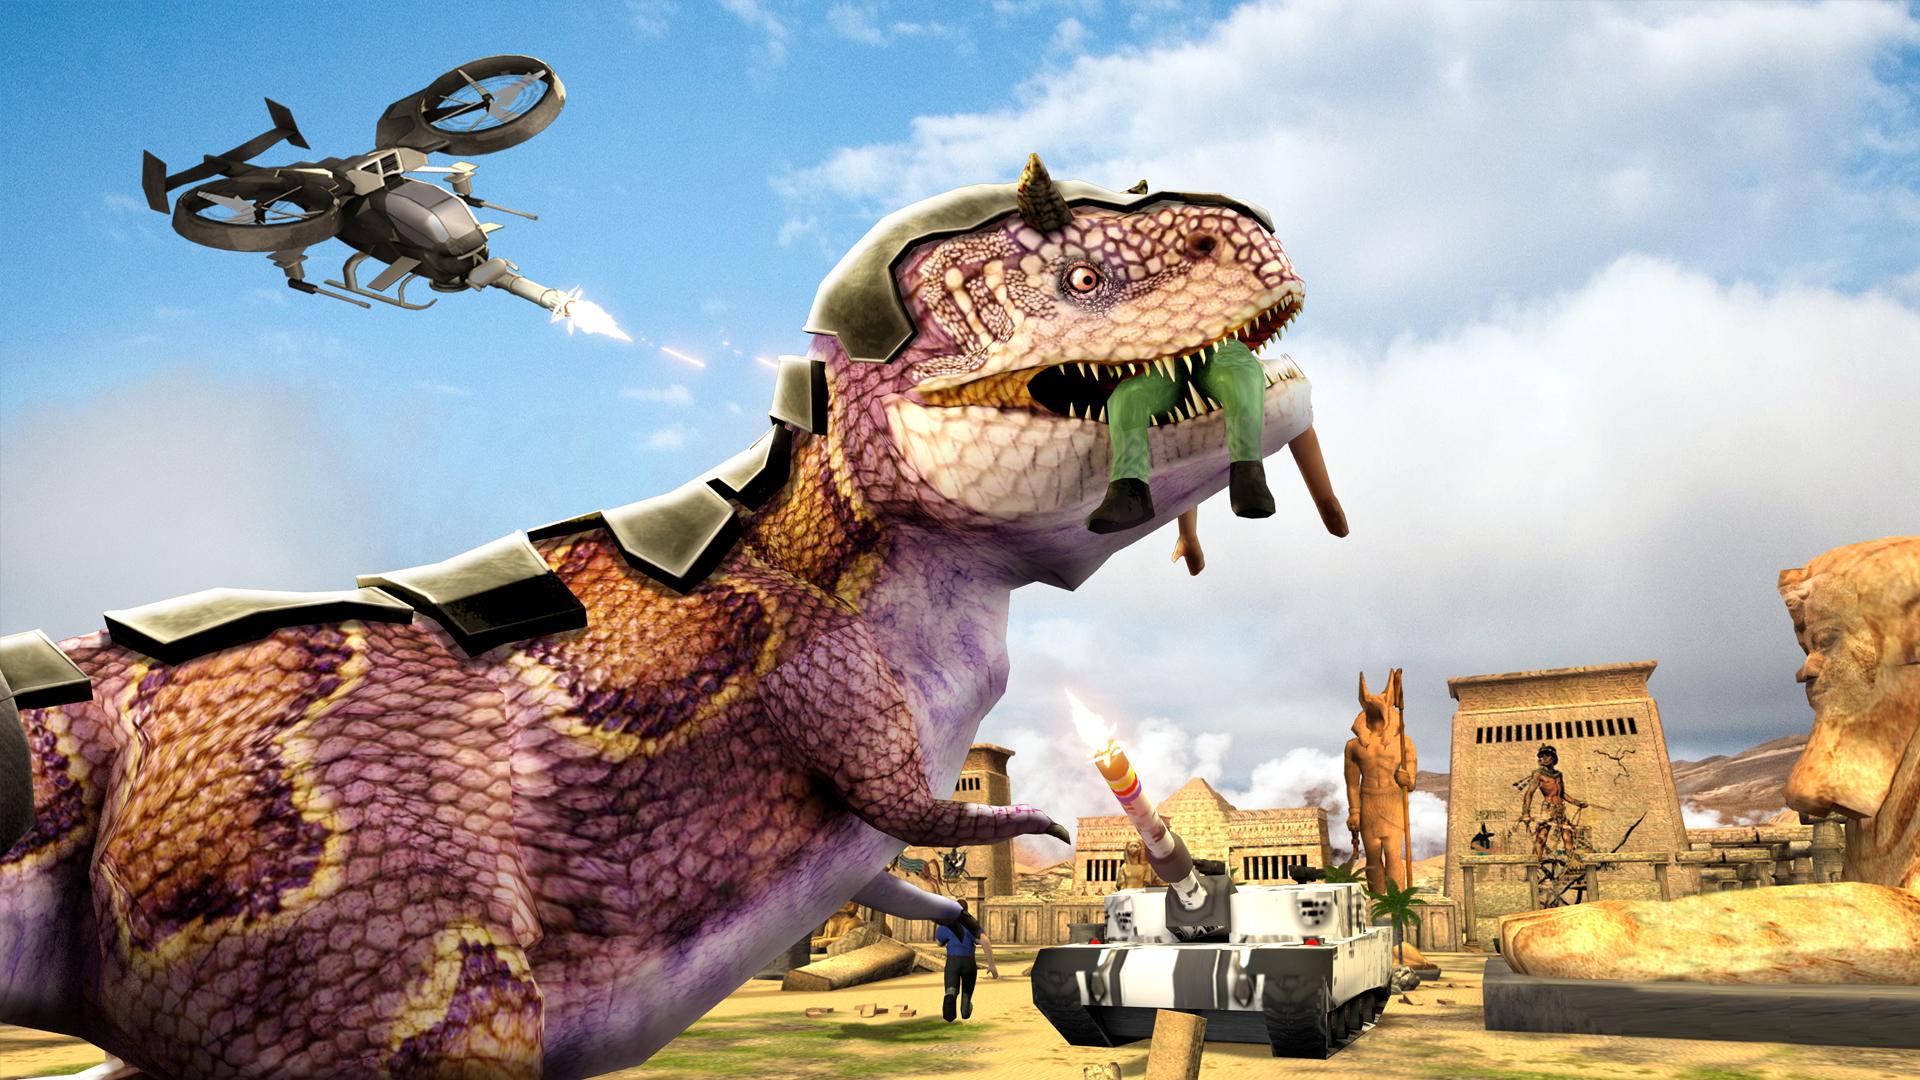 Dino T-Rex Mod apk download - Dino T-Rex MOD apk 1.68 free for Android.